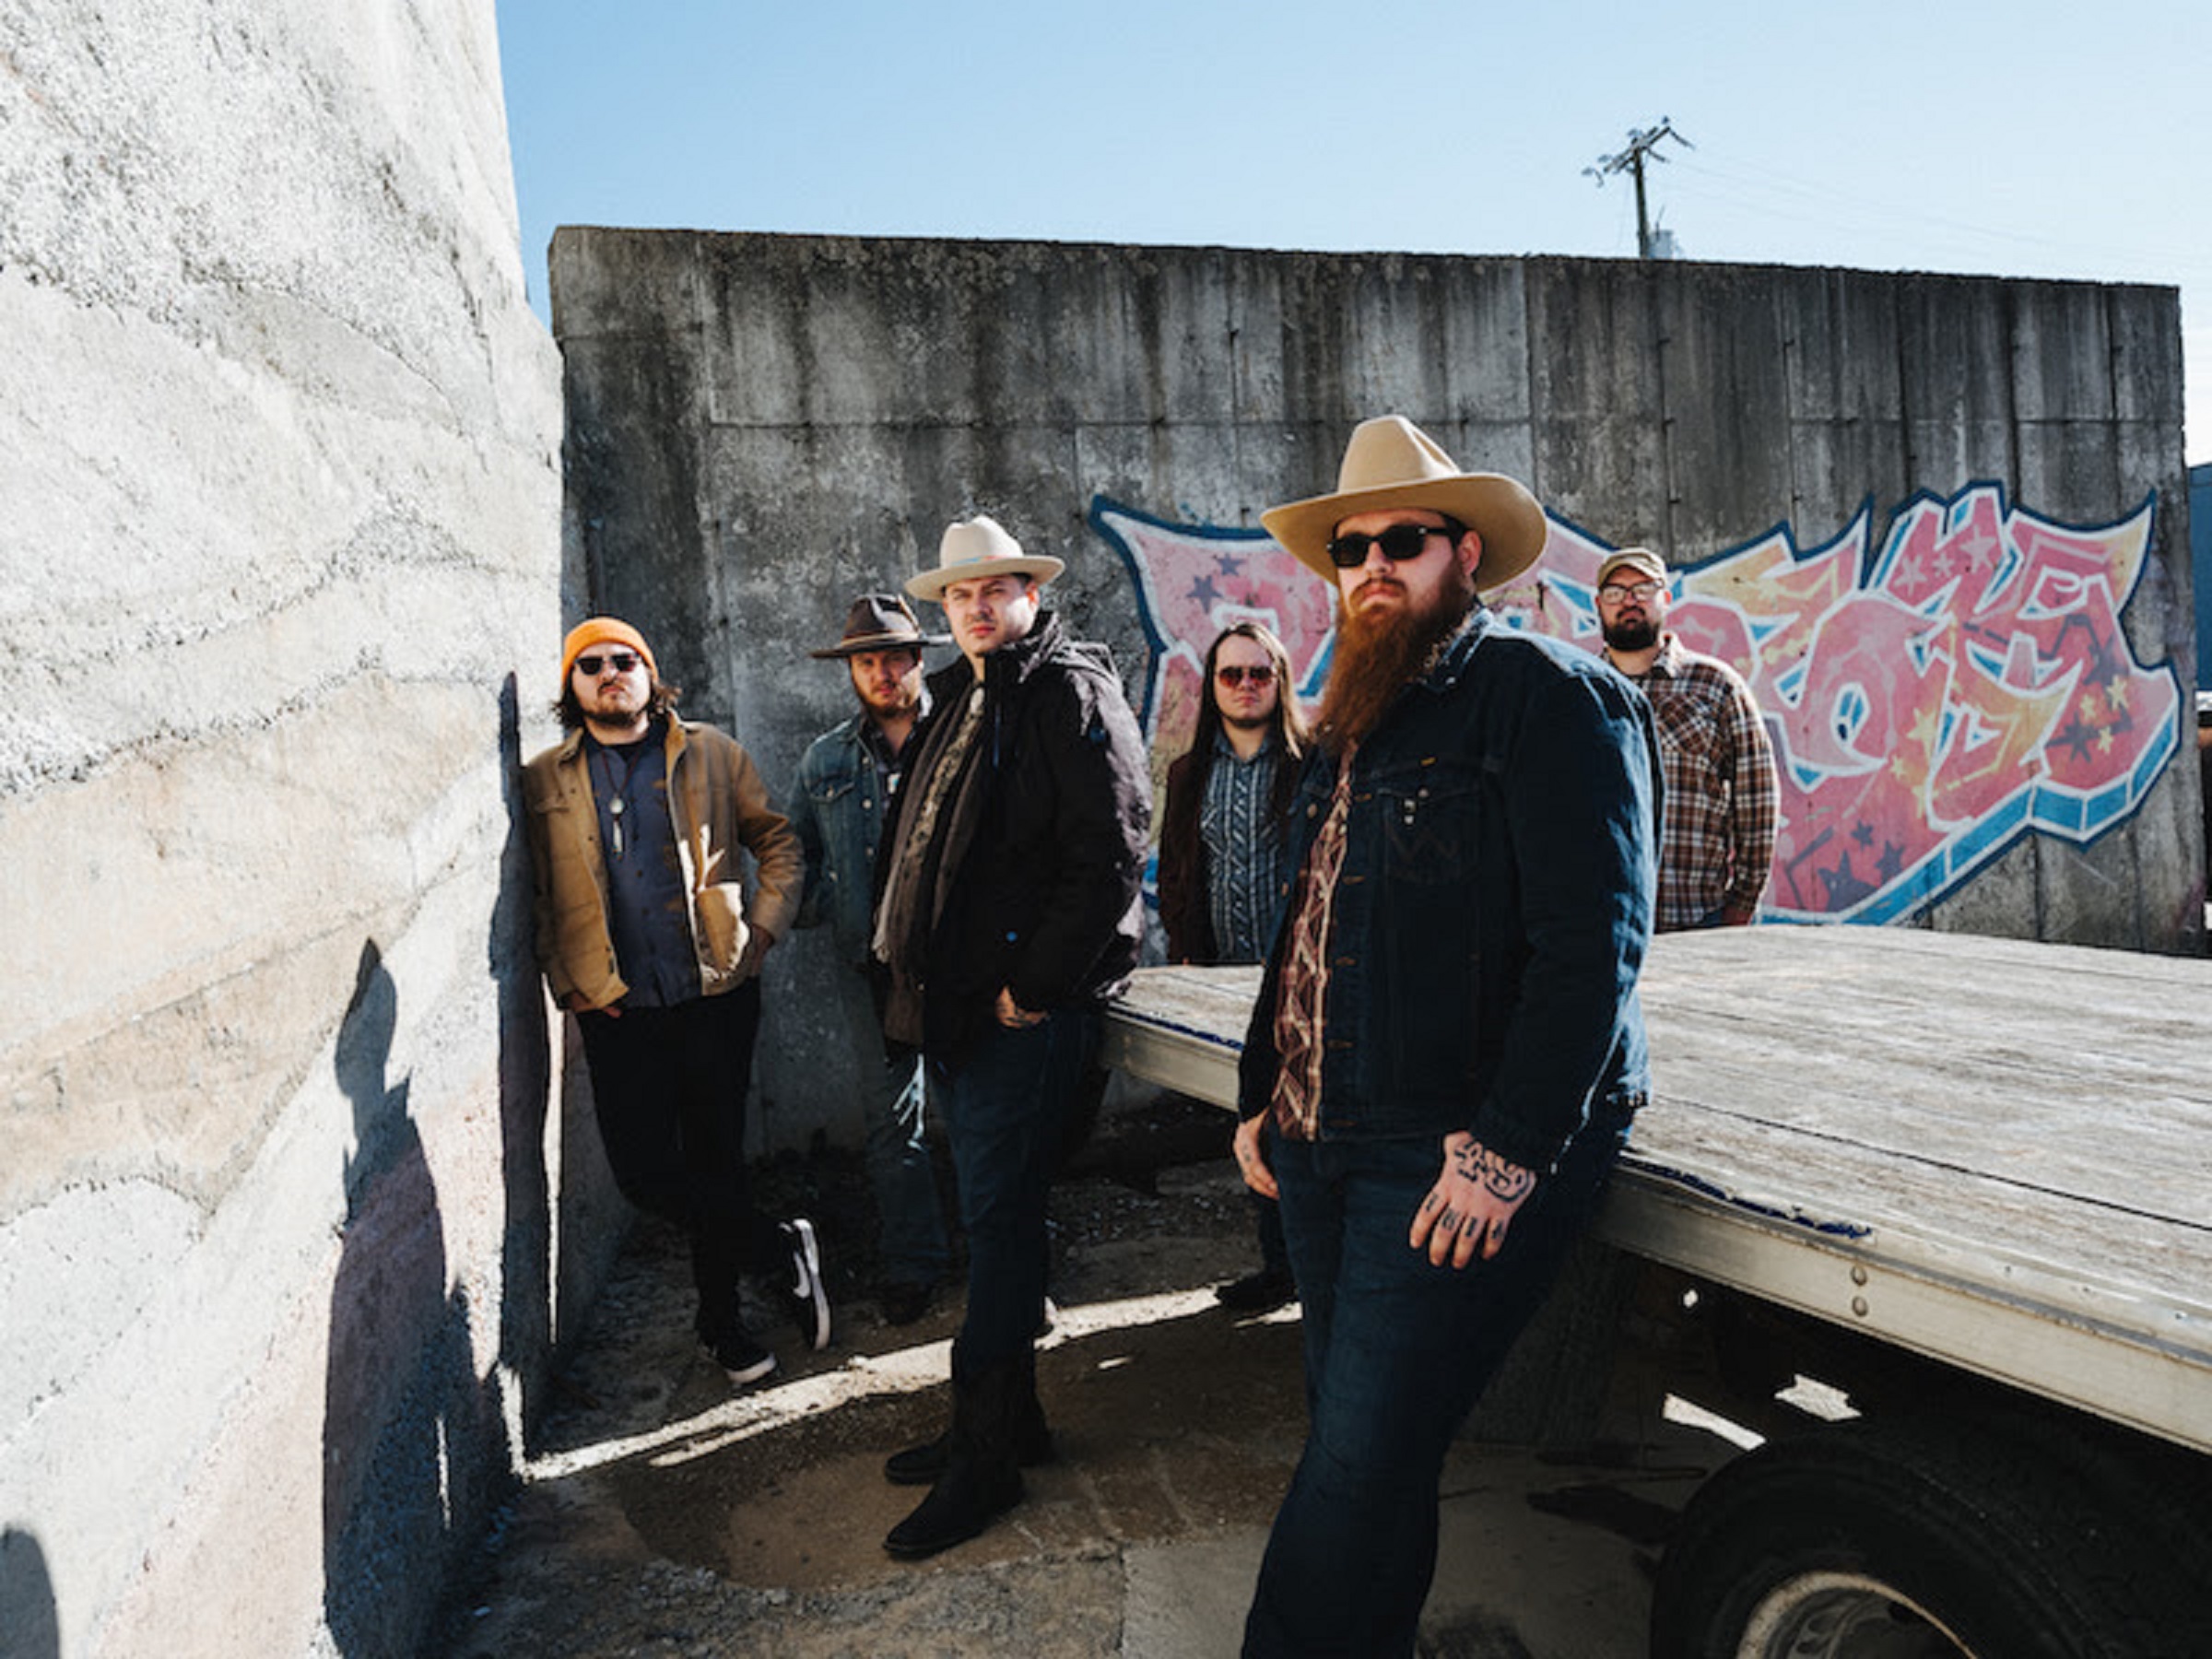 49 Winchester To Release "Fortune Favors The Bold" May 13th - Release "Russell County Line" Video Today